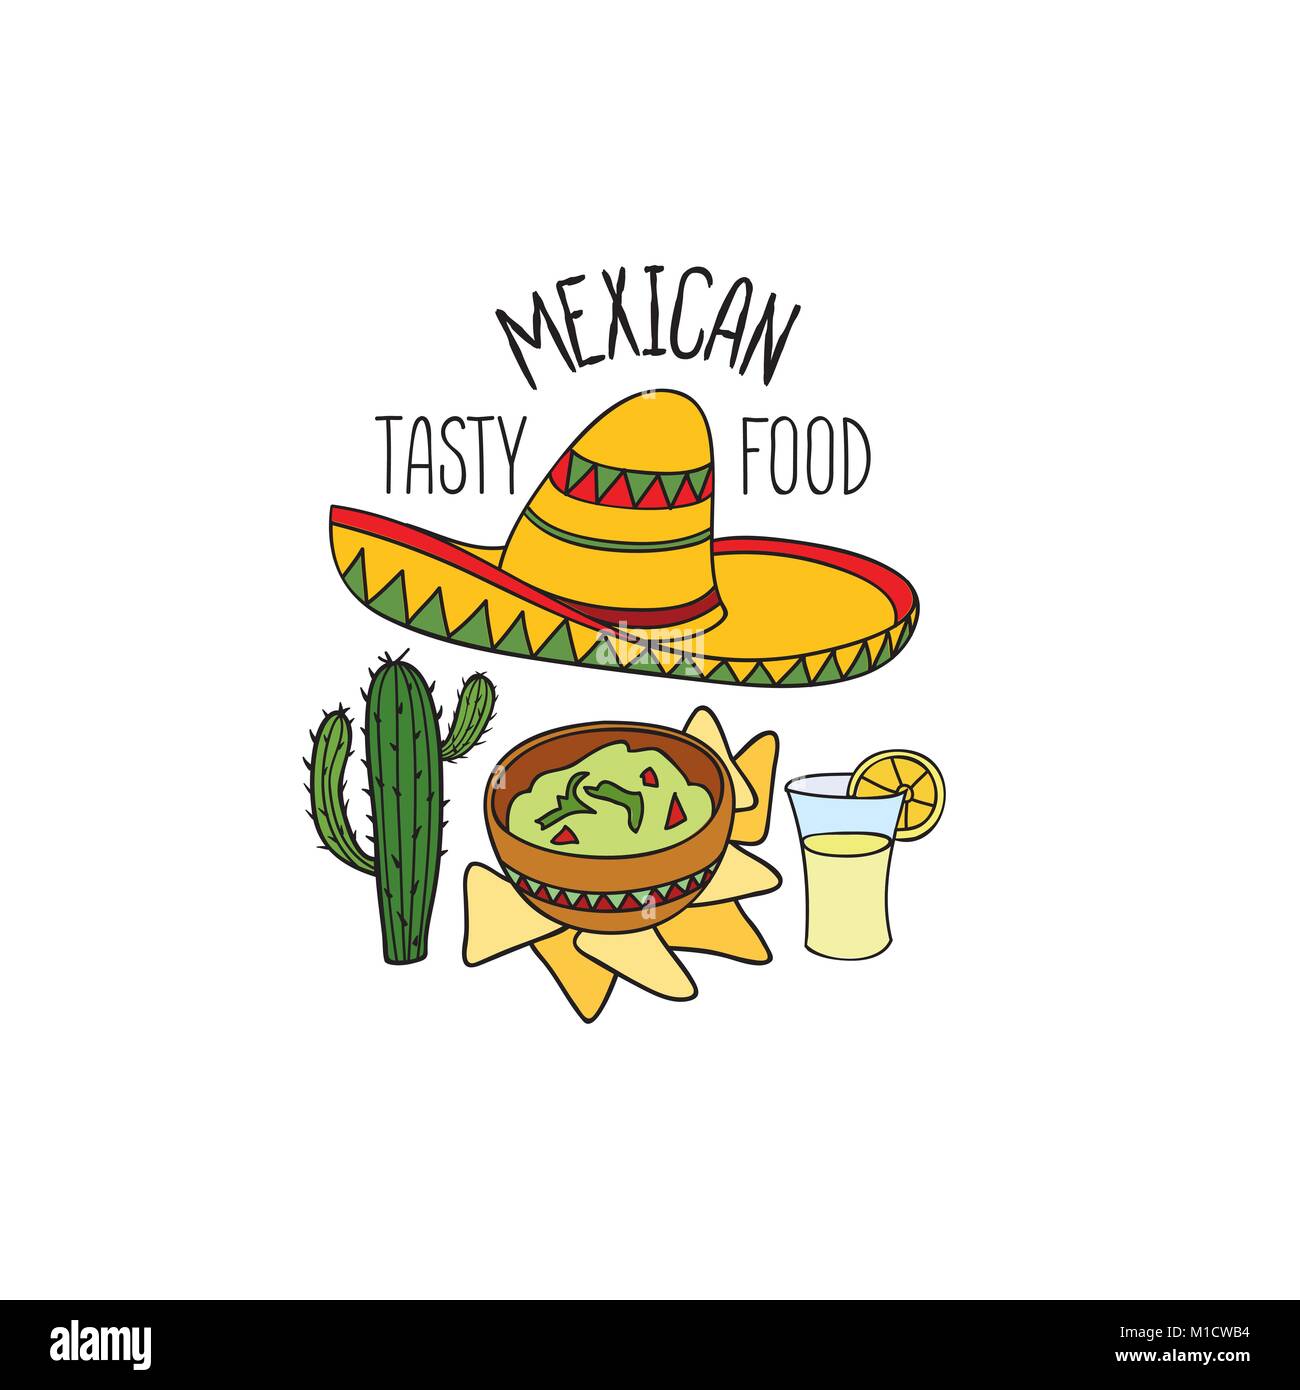 Mexican food symbol. National cuisine set. Mexican dish doodles sign. Fastfood icons with musical instrument and sombrero hat. Stock Vector